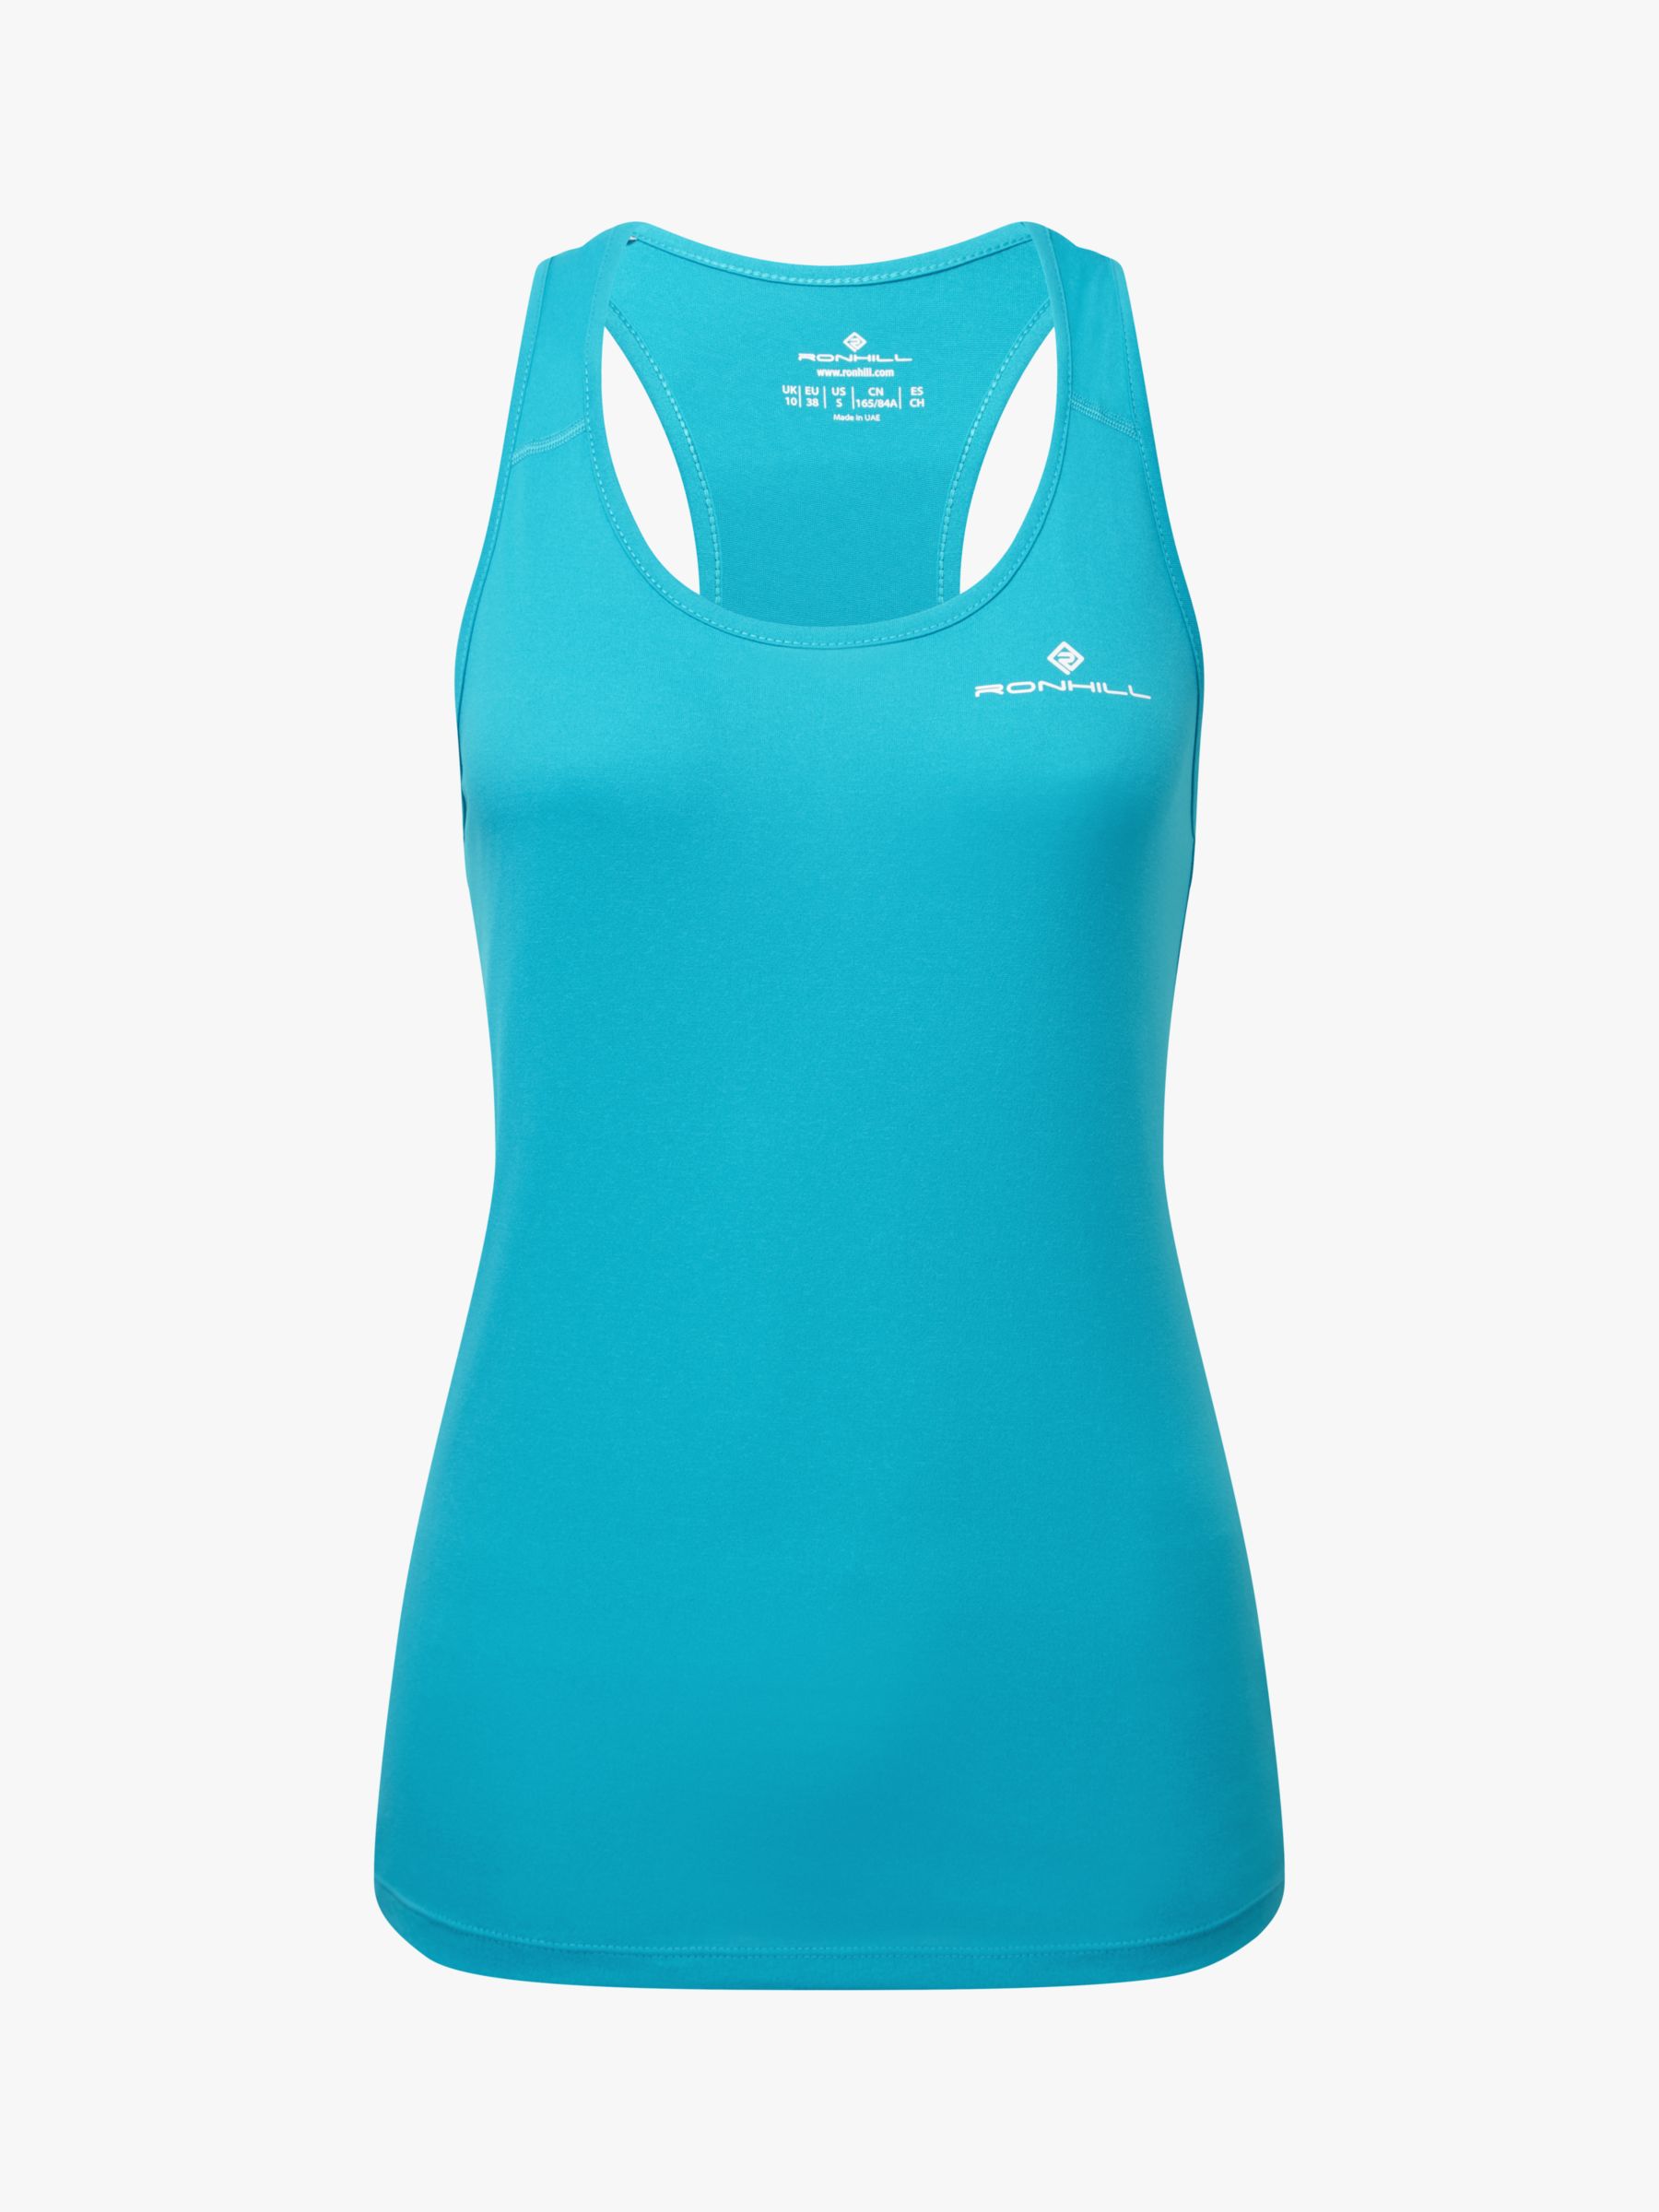 Buy Ronhill Core Running Vest Top, Turquoise Online at johnlewis.com